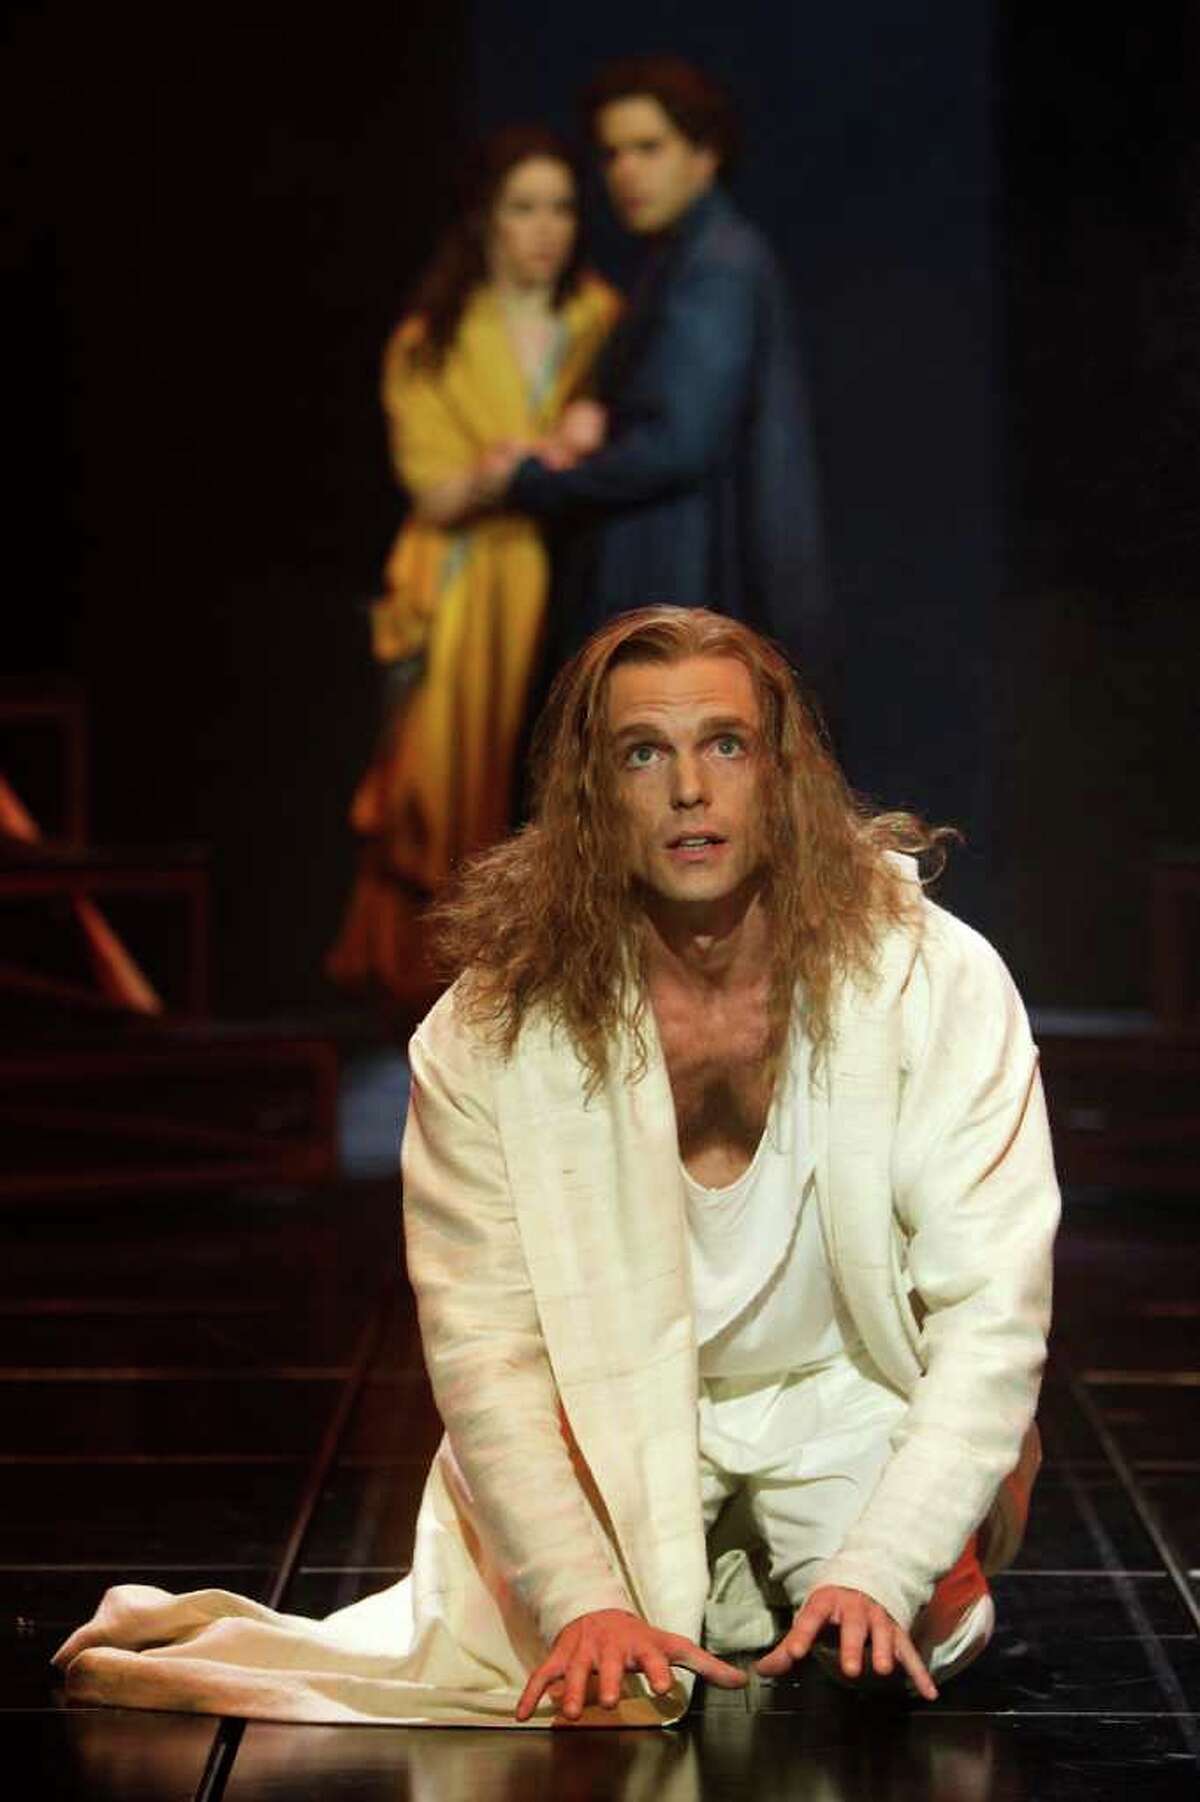 In this undated theater image released by the Stratford Shakespeare Festival, Paul Nolan portrays Jesus in "Jesus Christ Superstar," in a performance from the Stratford Shakespeare Festival in Stratford, Ontario. The Canadian production will be coming to Broadway, with previews beginning on March 1 at the Neil Simon Theatre and an official opening set for March 22. (AP Photo/Stratford Shakespeare Festival, David Hou)